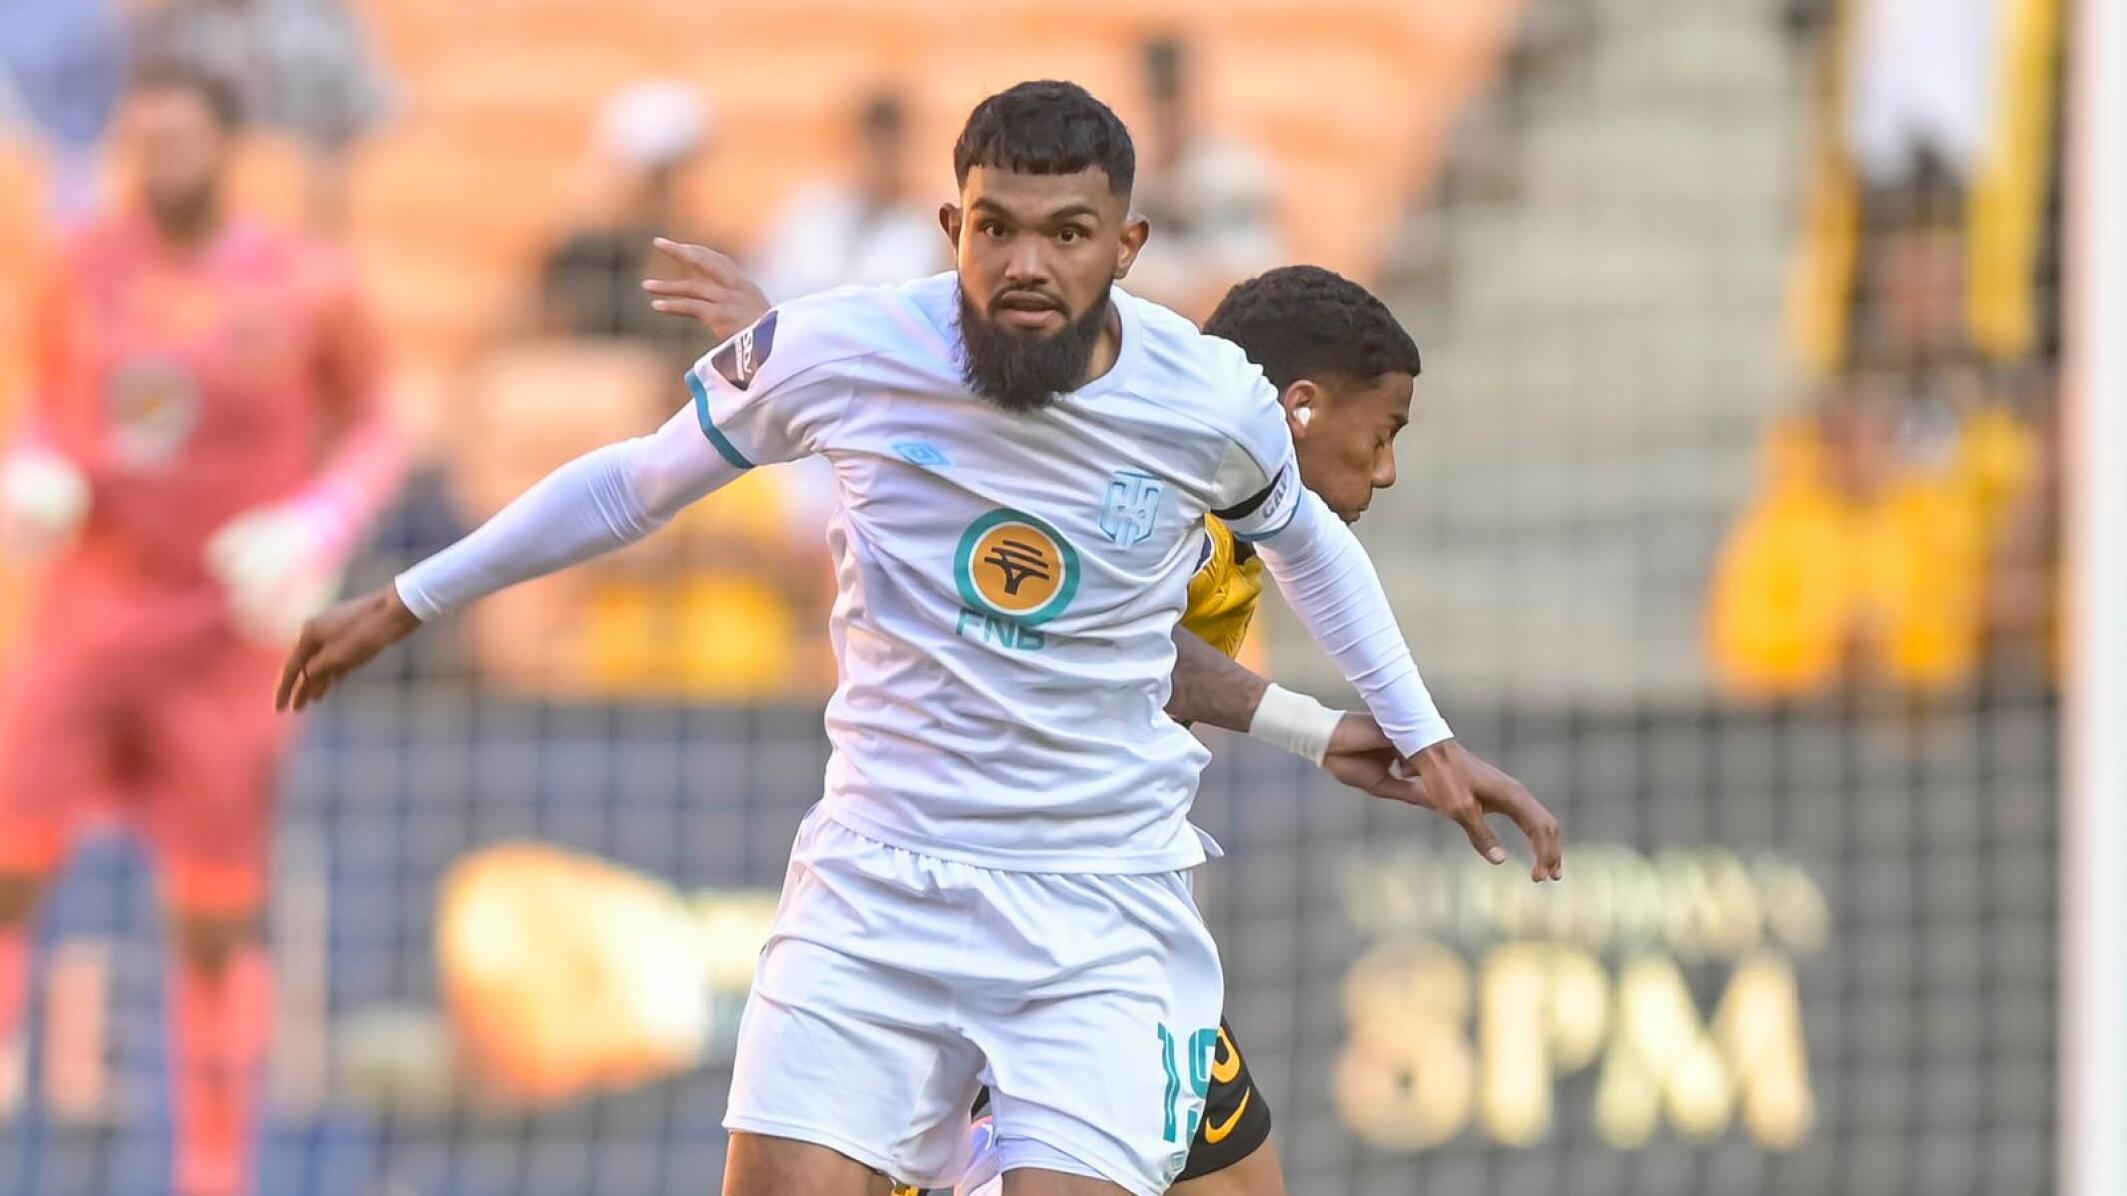 Keanu Cupido of Cape Town City and Dillan Solomons of Kaizer Chiefs fight for the ball during the DStv Premiership match at the FNB Stadium in Johannesburg